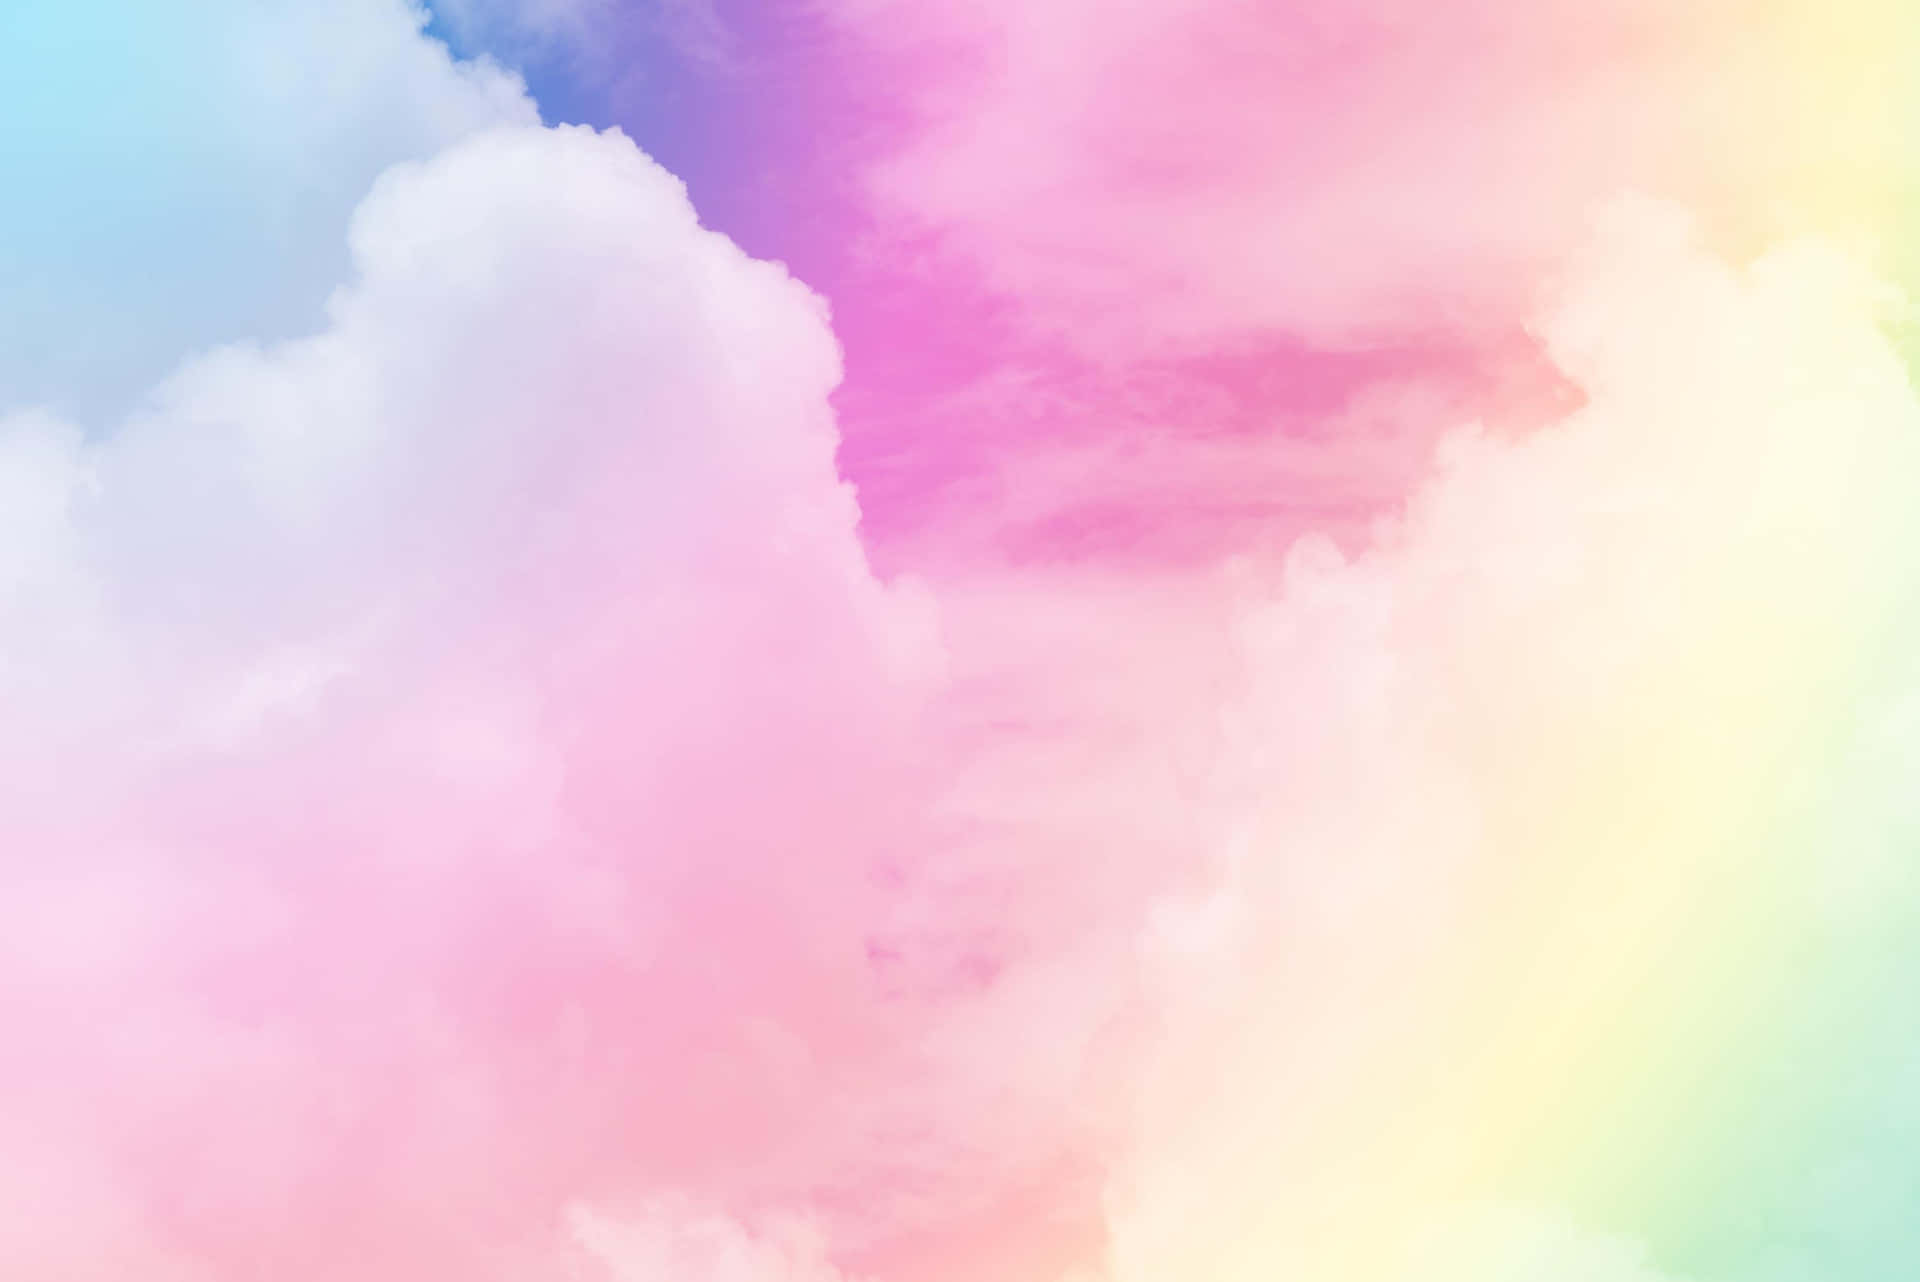 "get Lost In The Pastel Dream With This Subtle Hue Wallpaper"